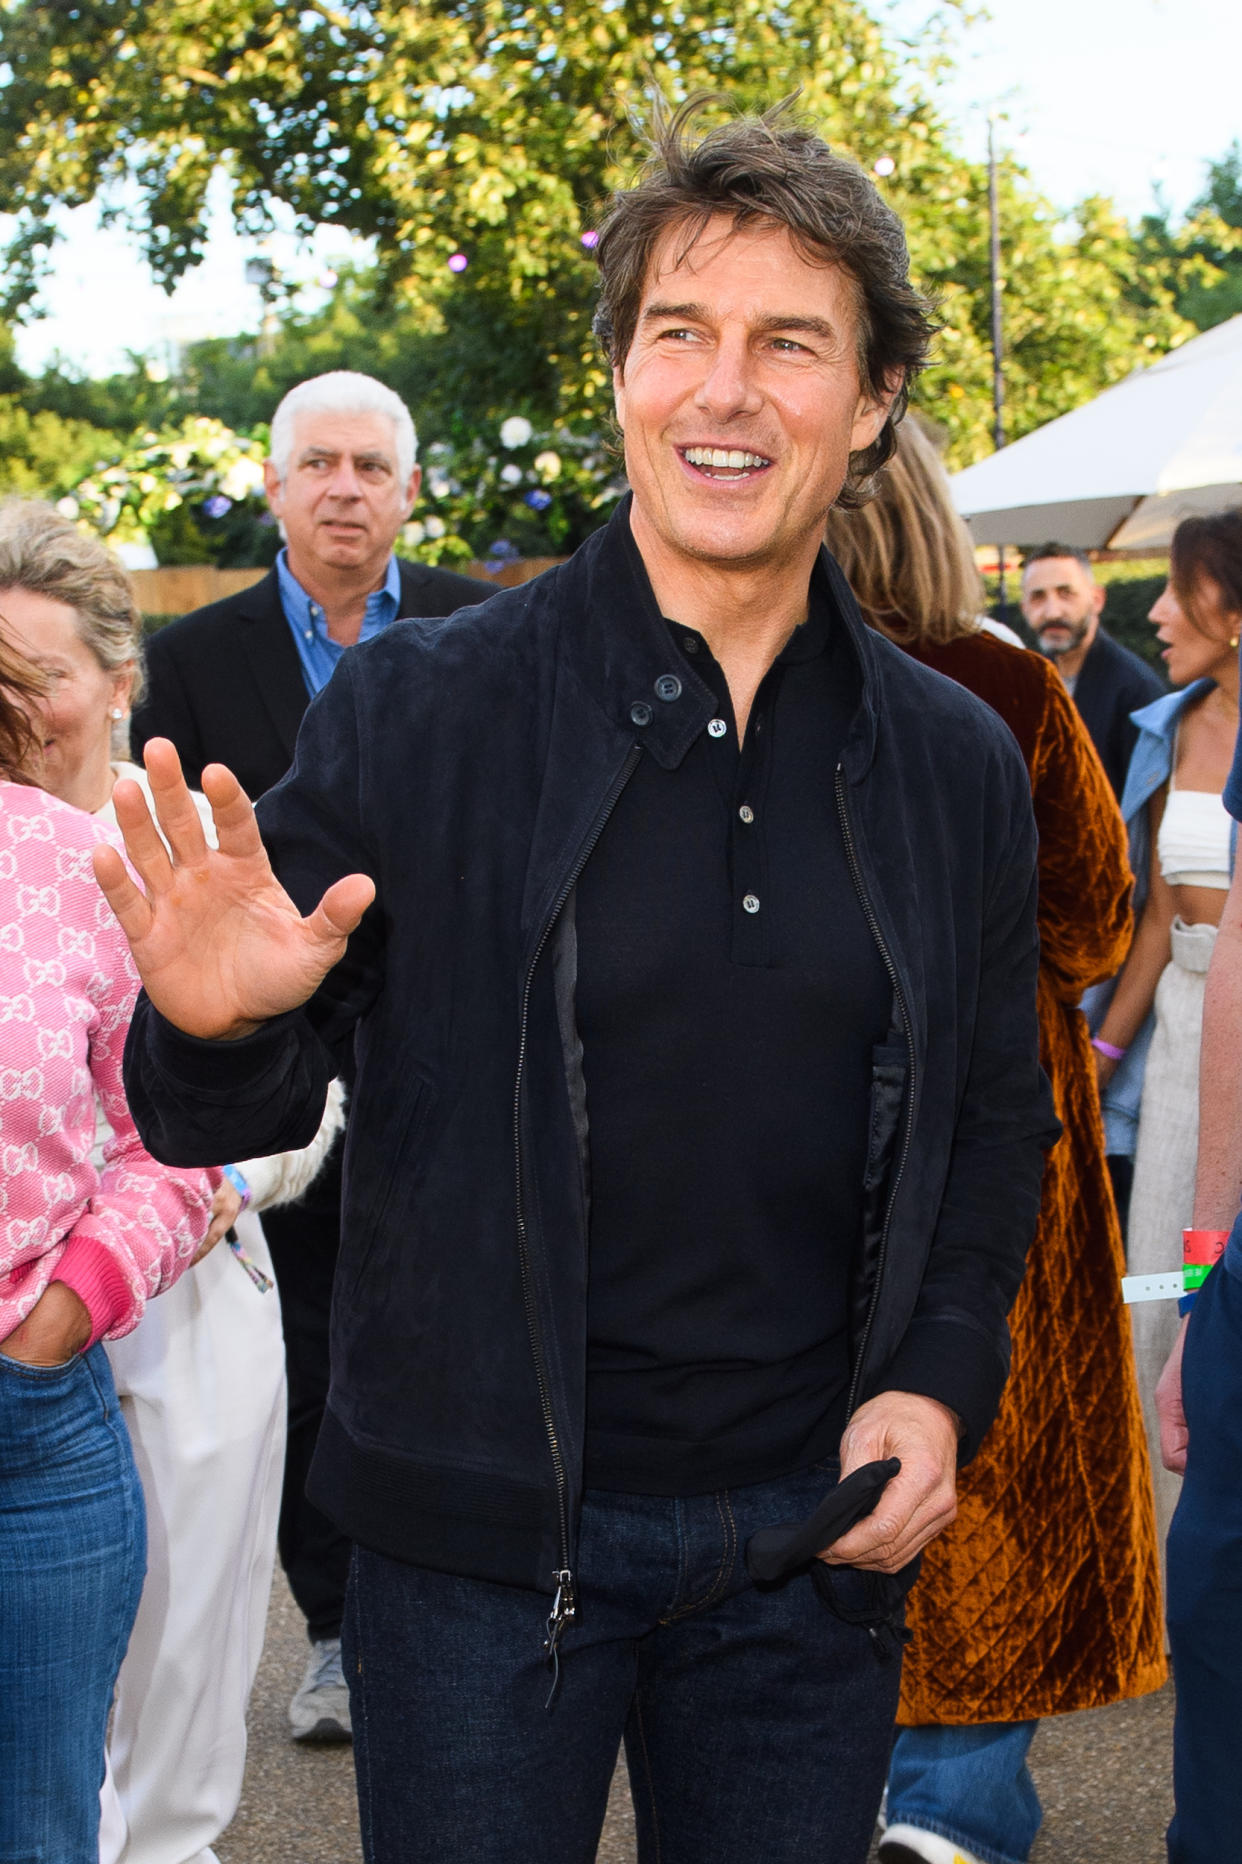 Tom Cruise attends the American Express present BST Hyde Park event on July 1, 2022 in London, England. (Joe Maher / Getty Images for AMEX)